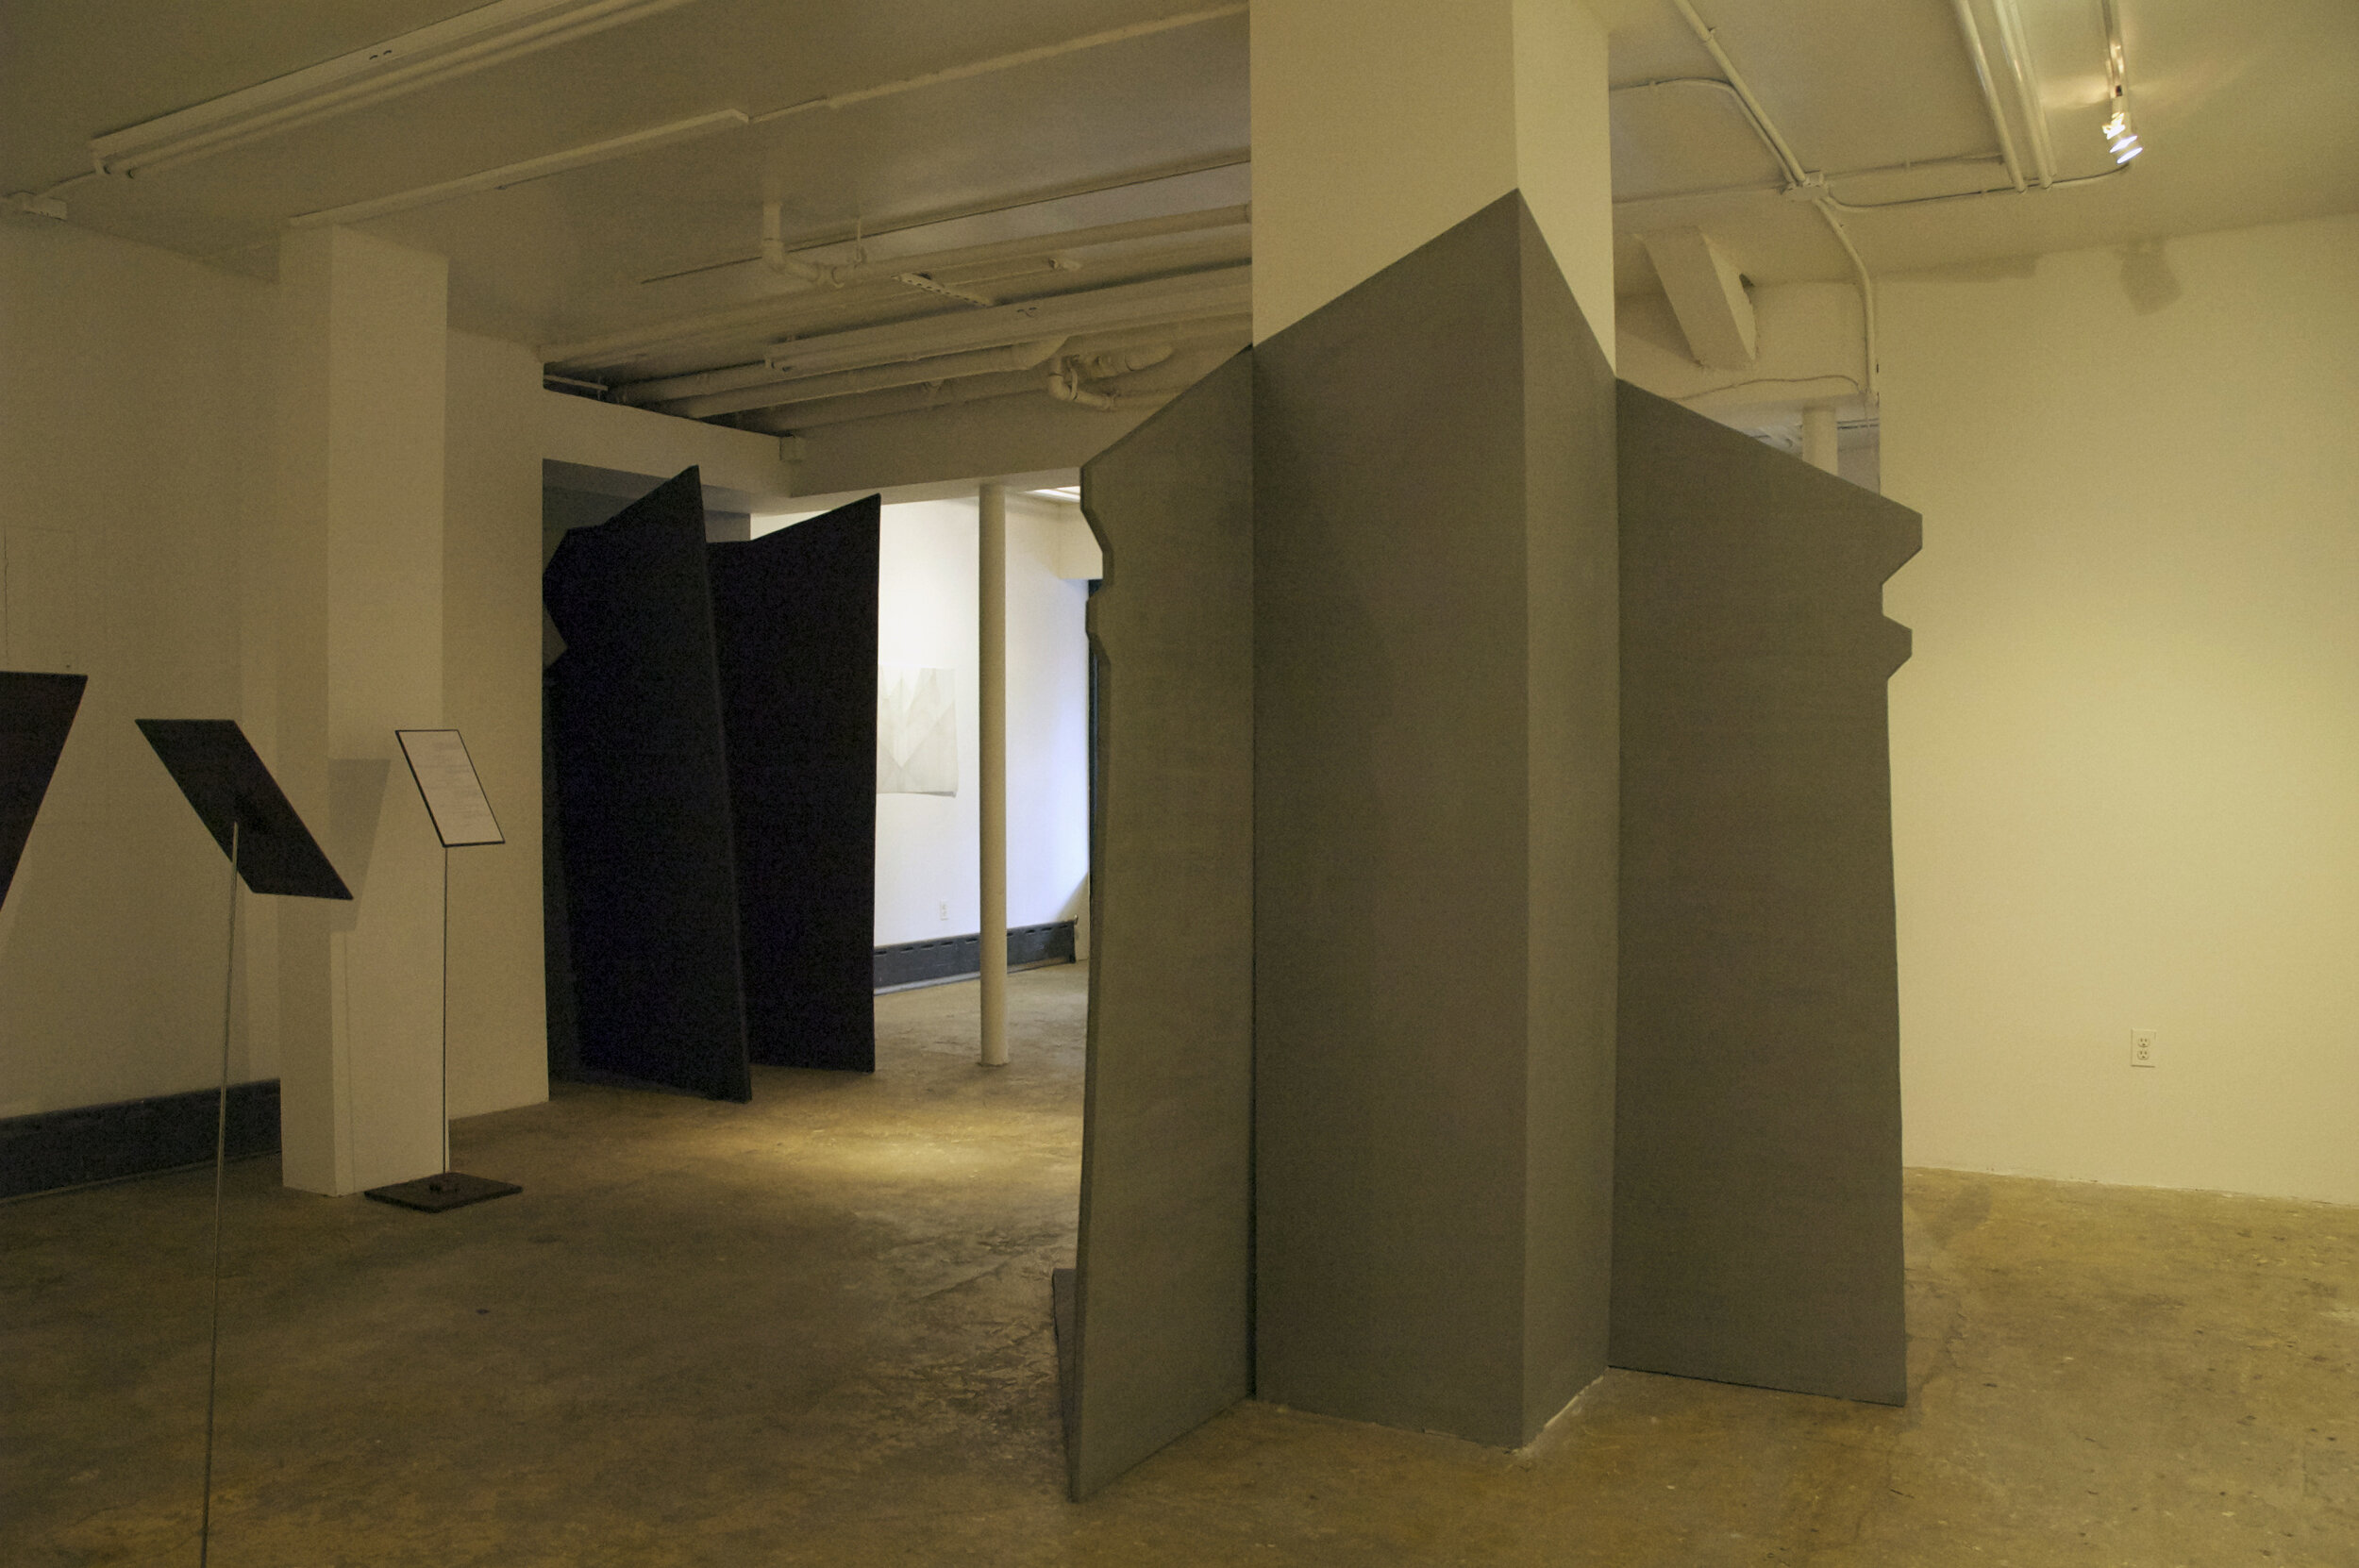 Installation image from the 2013 Adam Hayes exhibition, The room had an imposing dominance over the man, at Cindy Rucker Gallery